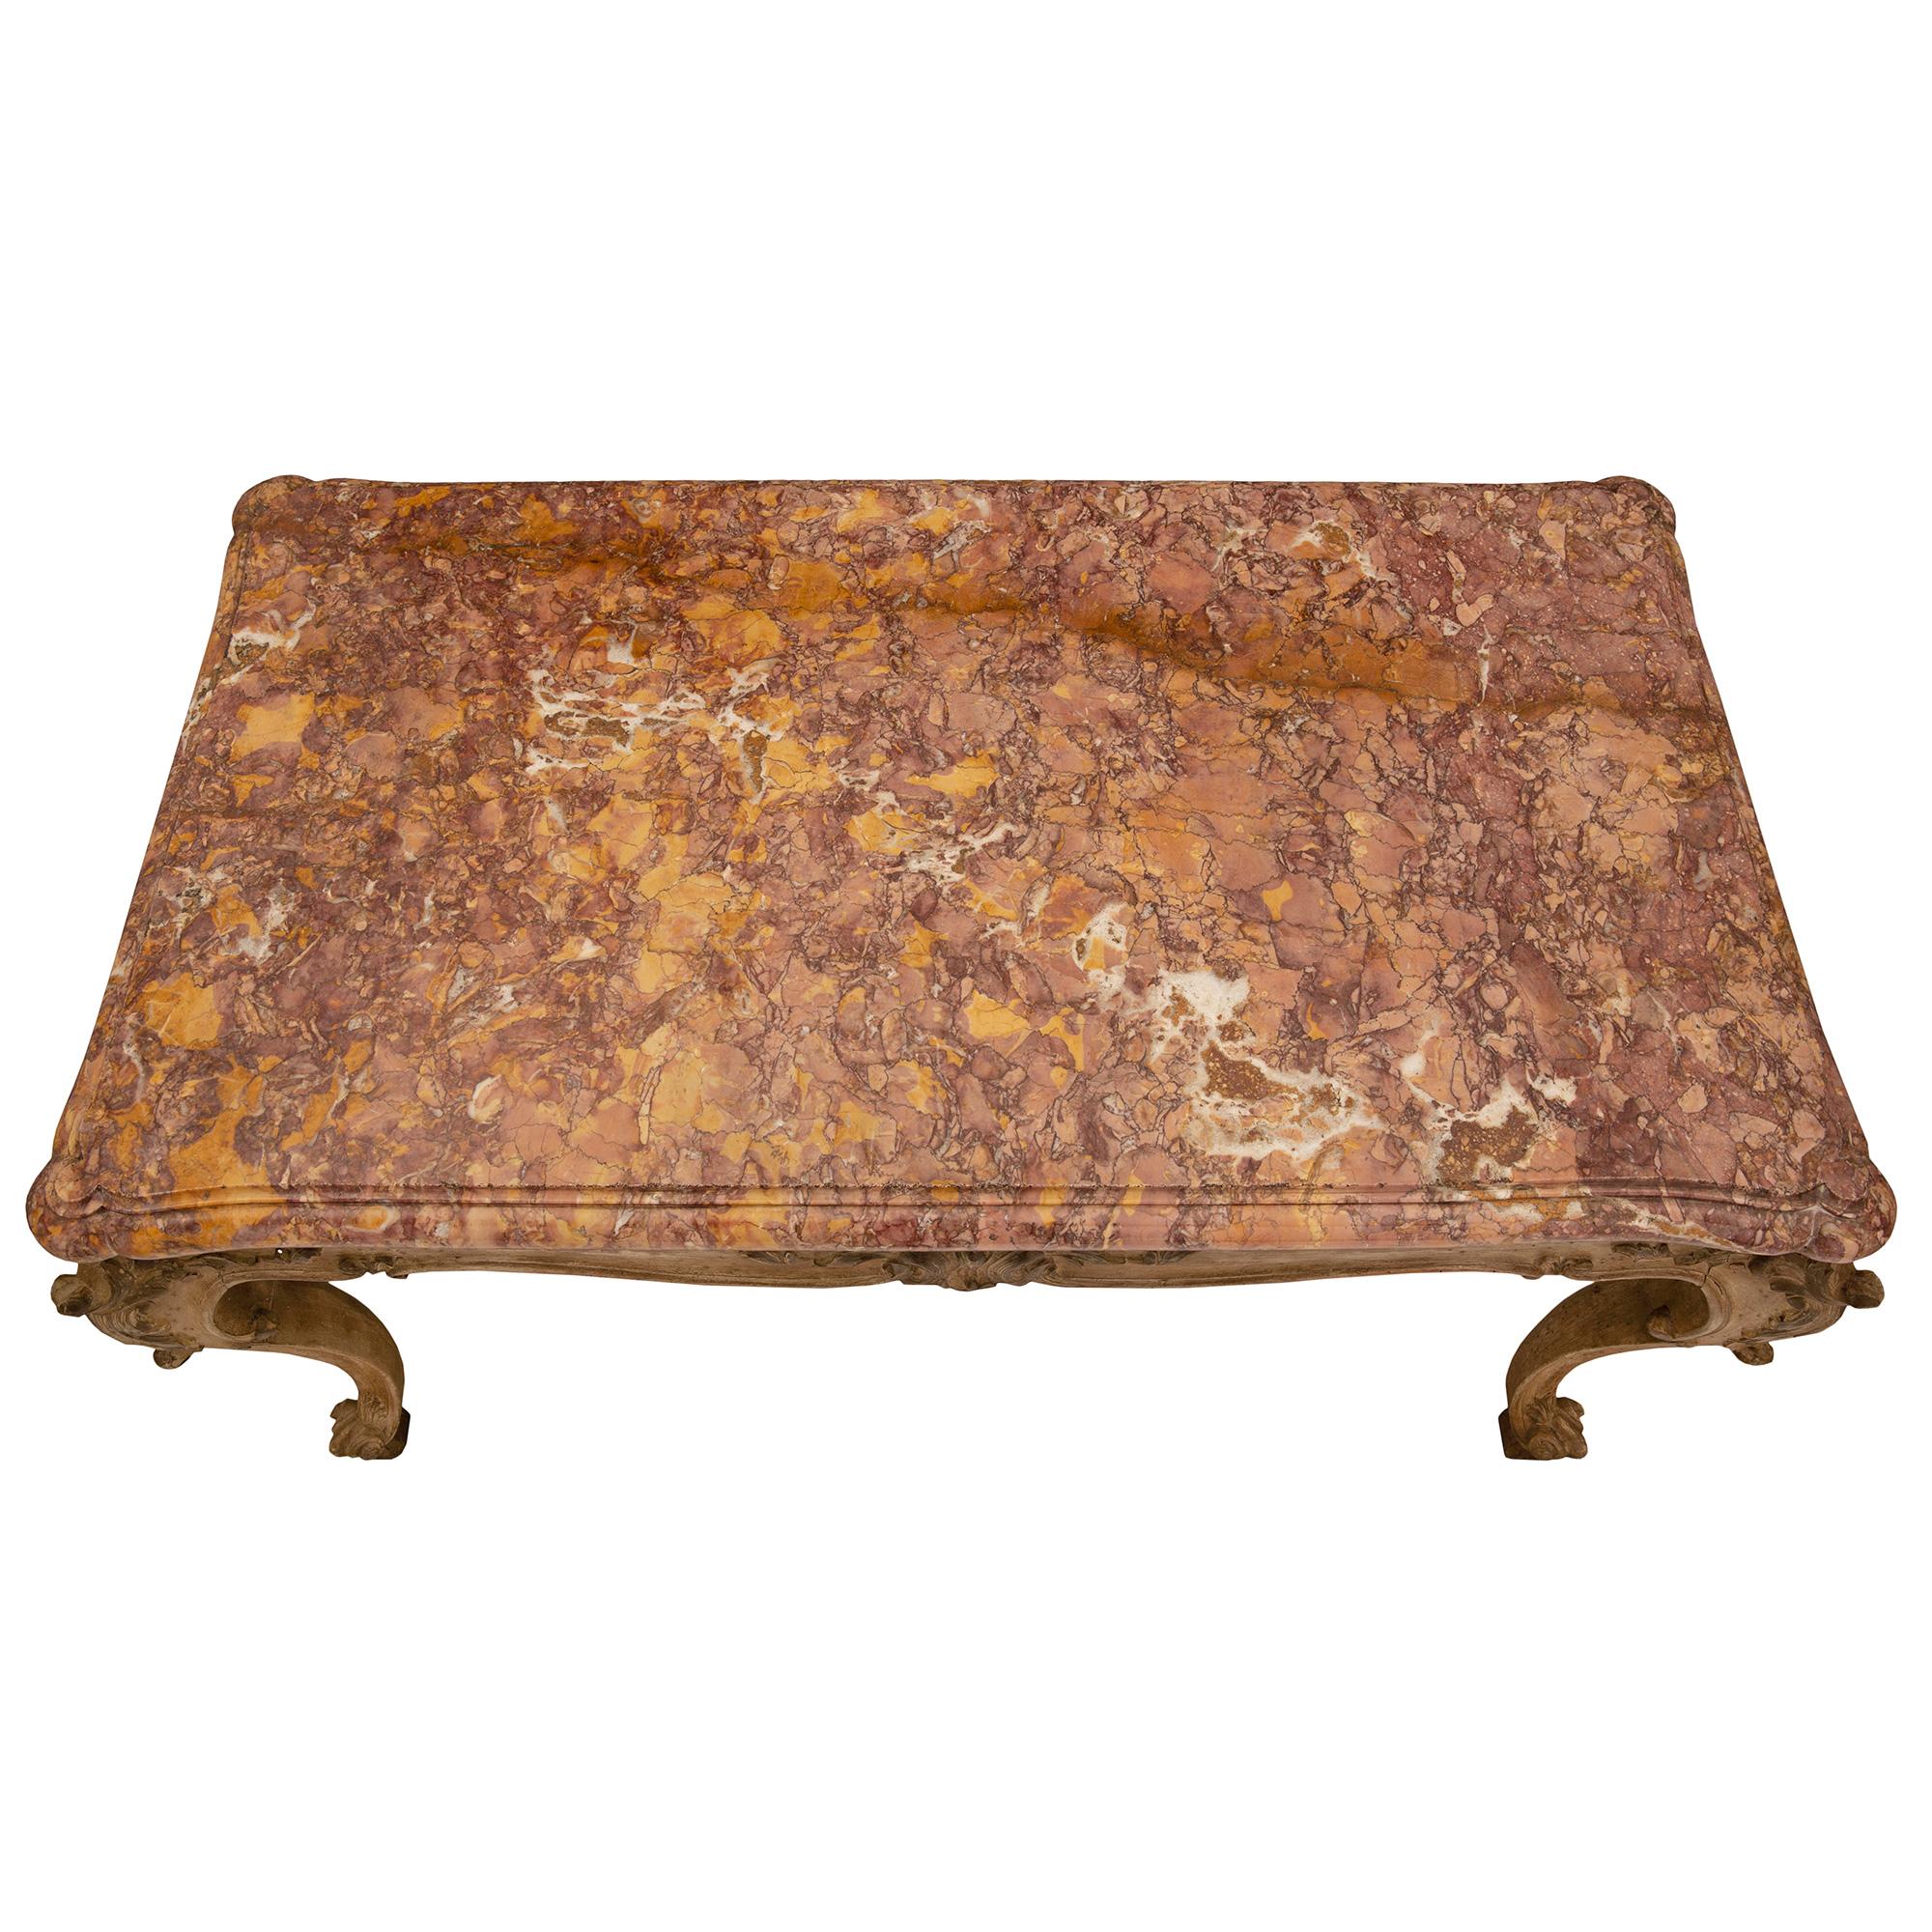 A charming Italian 19th century Louis XV st. patinated wood and Brocatelle d’Espagne marble coffee table. The coffee table is raised by elegant scrolled block feet below lovely tapered cabriole legs. A most decorative fillet extends up each leg and